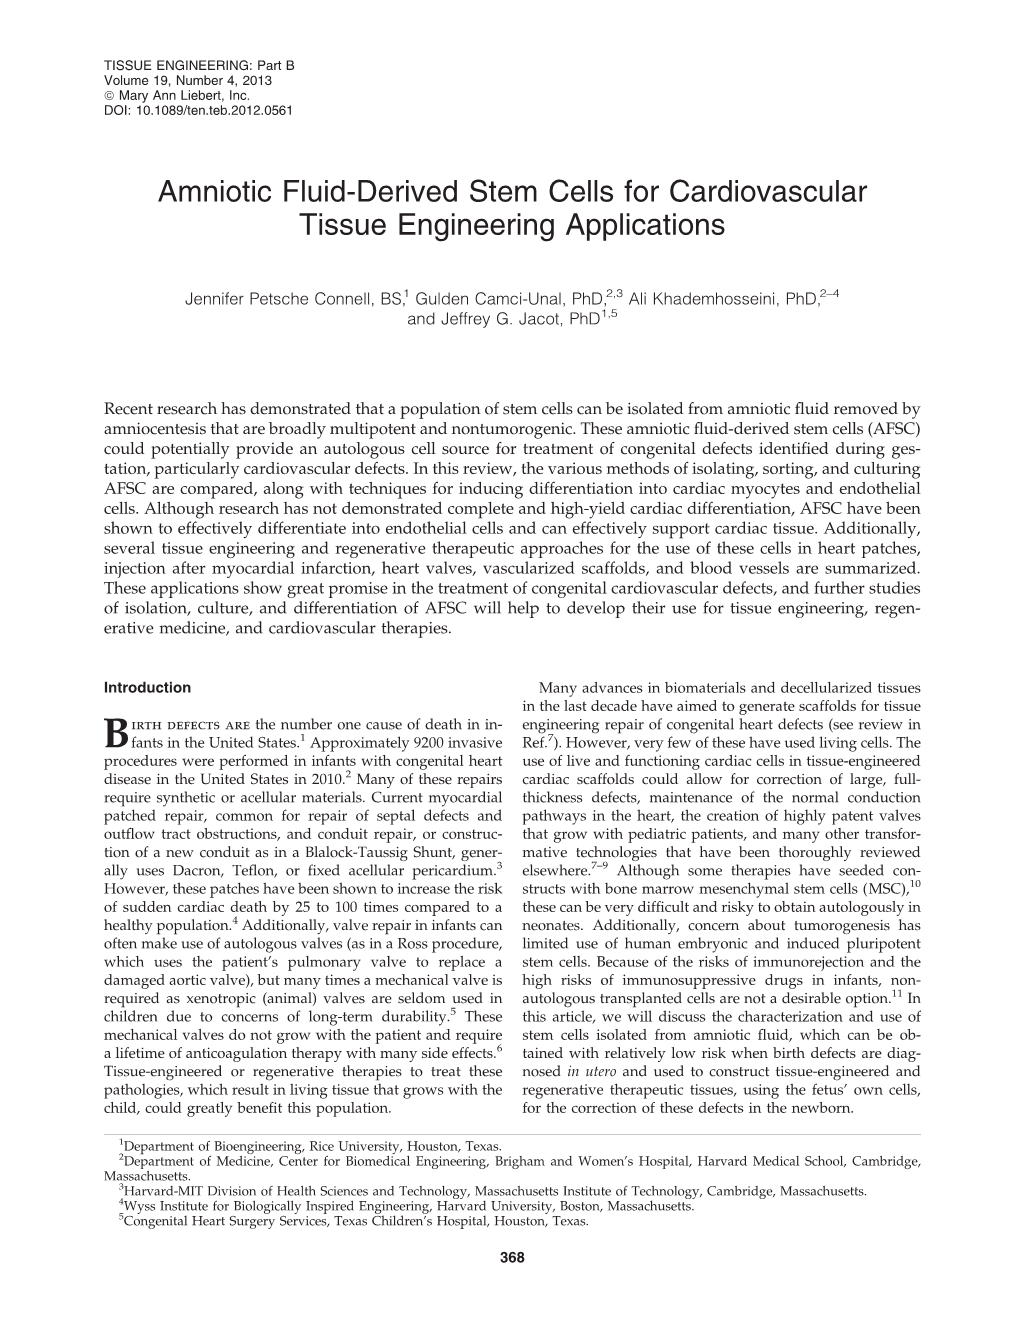 Amniotic Fluid-Derived Stem Cells for Cardiovascular Tissue Engineering Applications